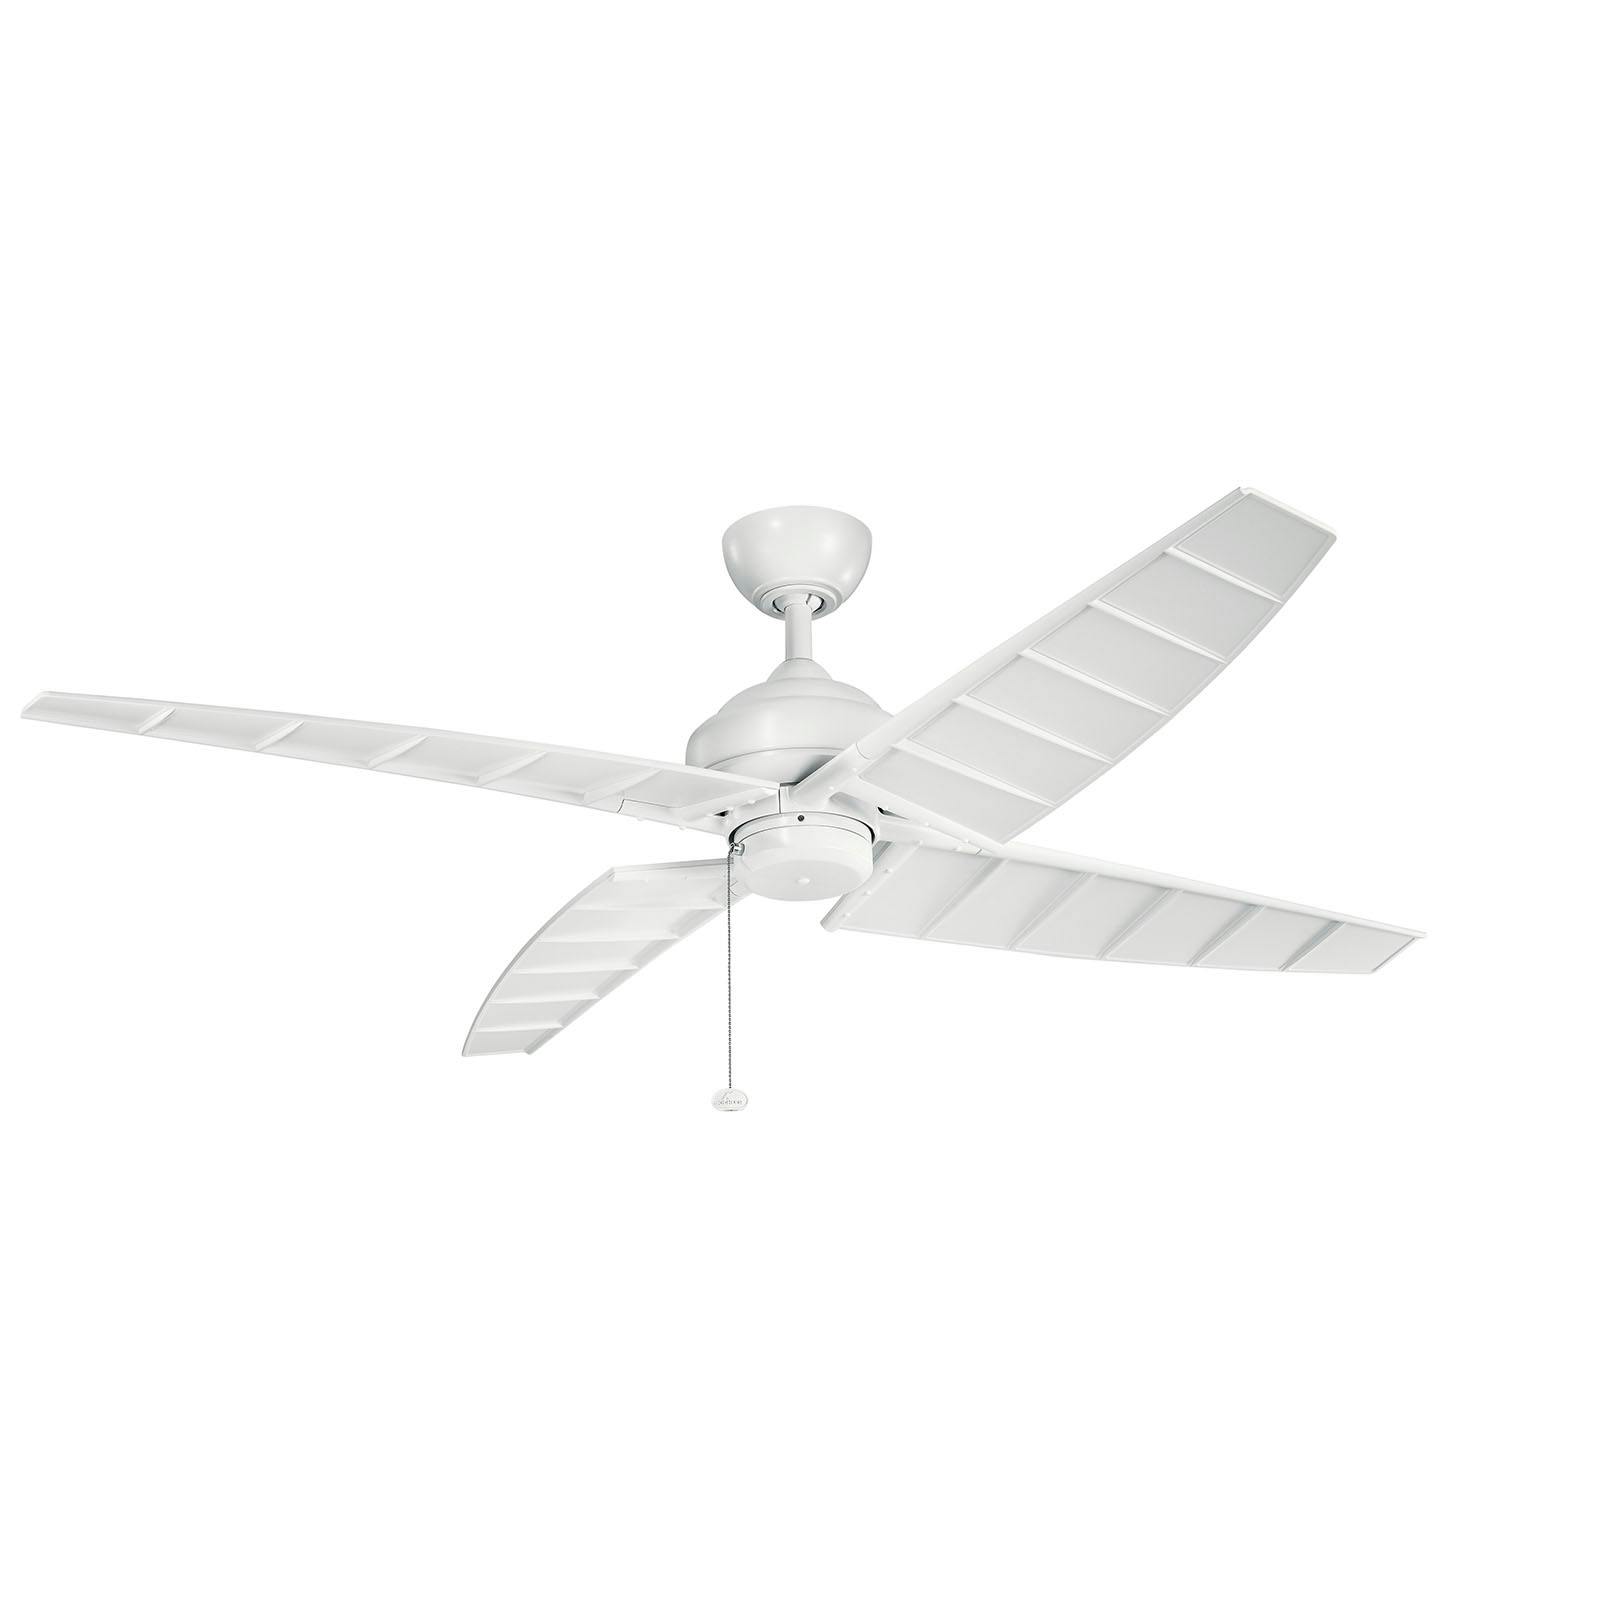 Surrey 60" Ceiling Fan Matte White on a white background